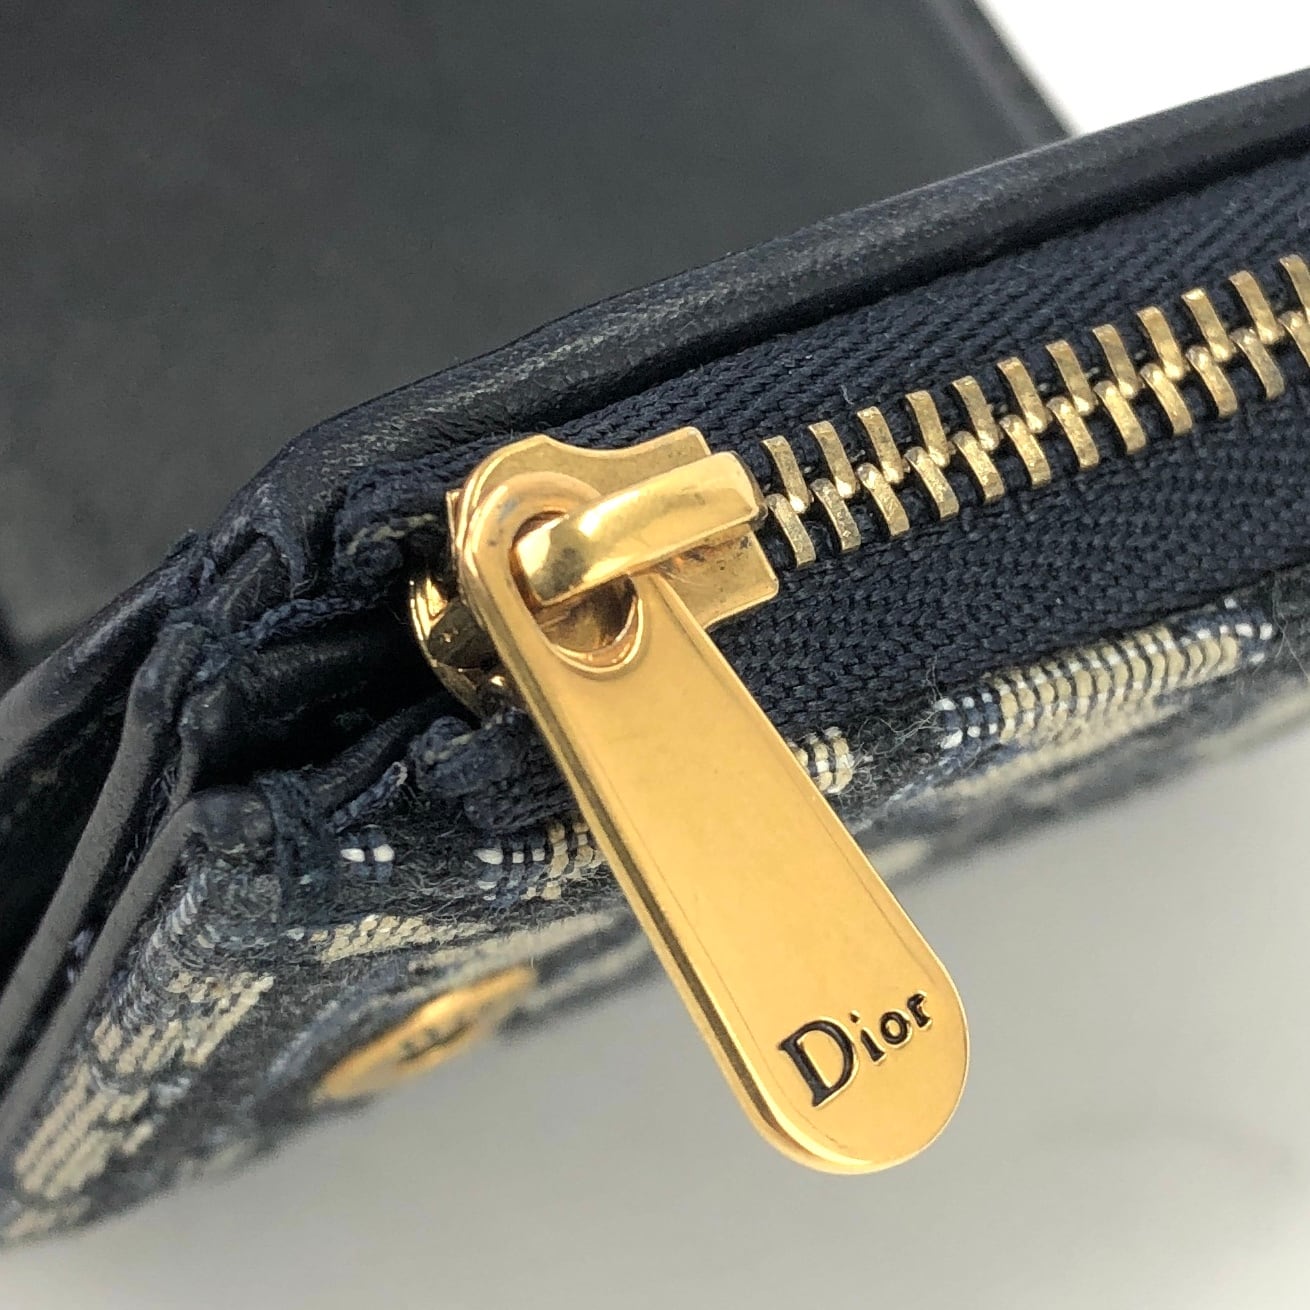 Christian Dior　クリスチャン ディオール　オブリーク　SADDLE ロータスウォレット　Dモチーフ　コンパクトウォレット　財布　 三つ折り財布　ネイビー　S5652CTZQ　Accessories　a7tyzr | VintageShop solo powered by BASE